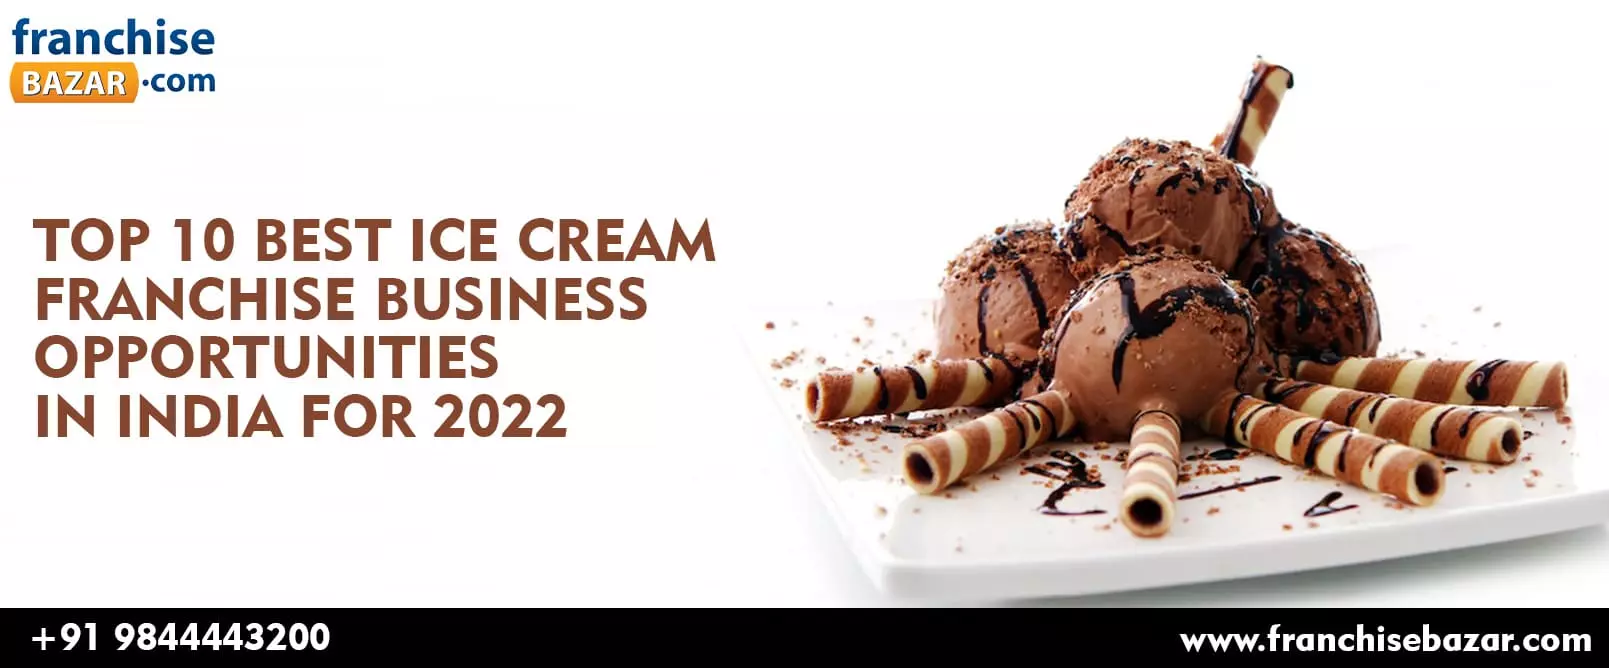 Top 10 Best Ice Cream Franchise Business Opportunities In India for 2022